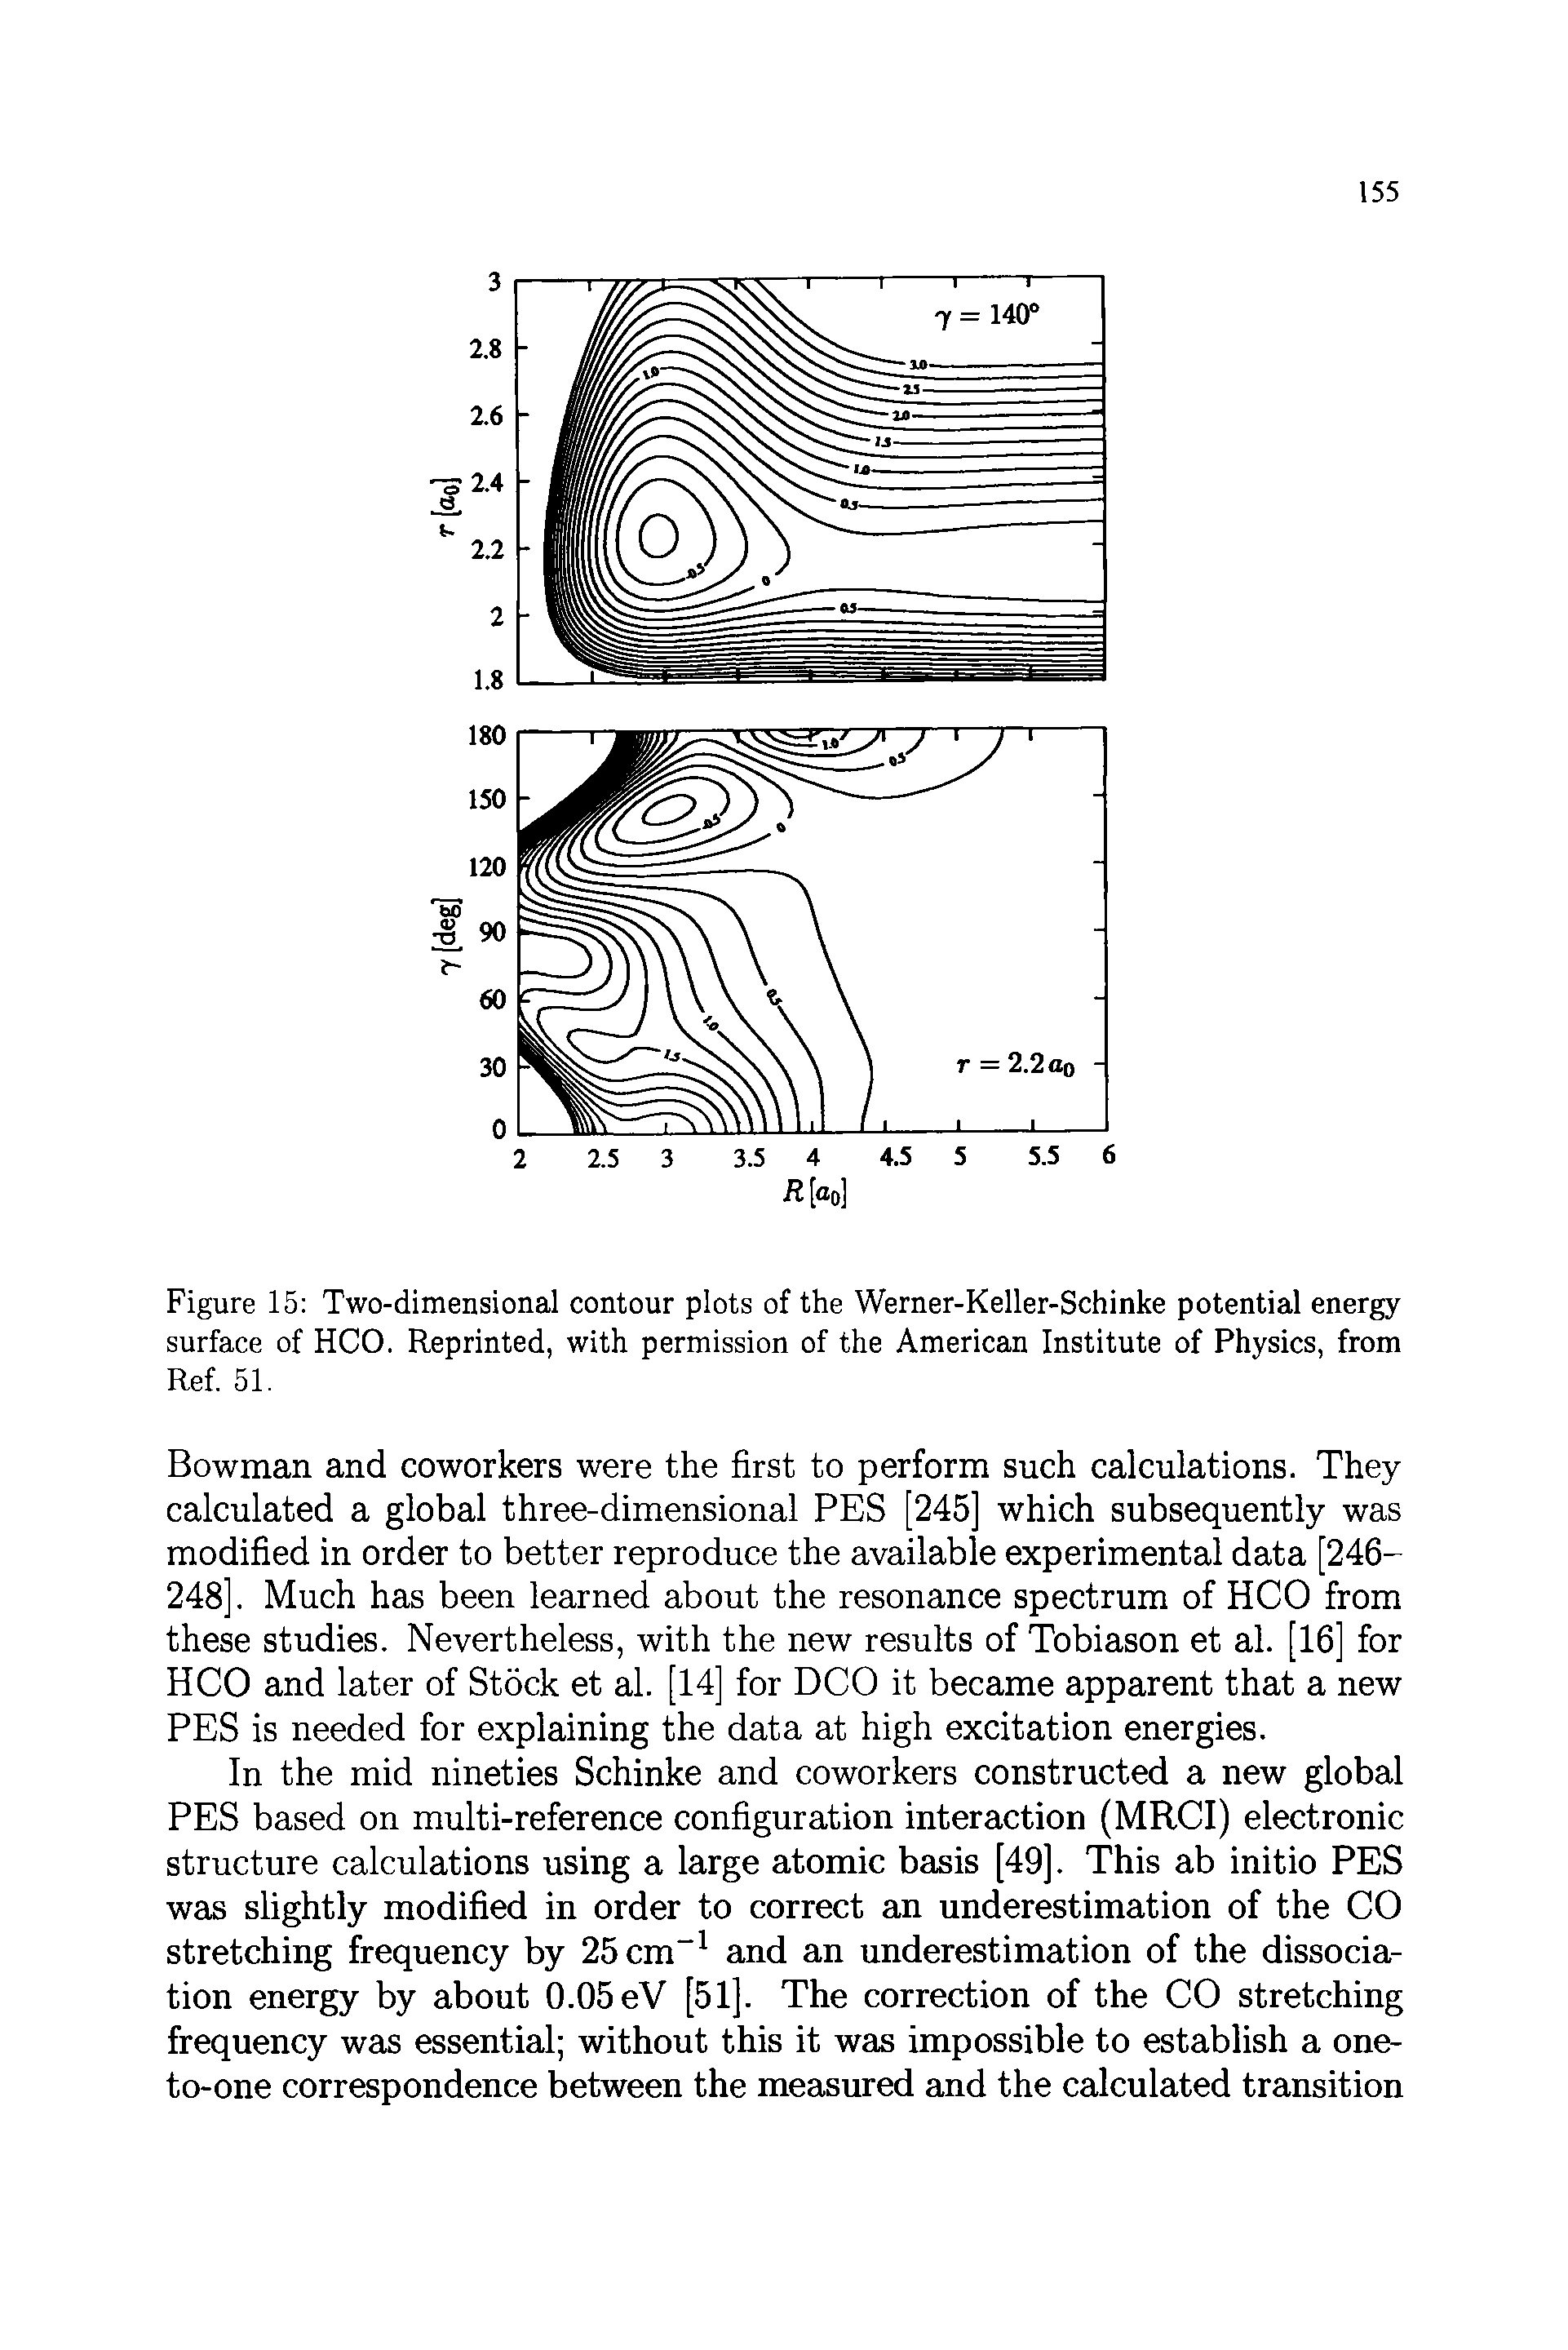 Figure 15 Two-dimensional contour plots of the Werner-Keller-Schinke potential energy surface of HCO. Reprinted, with permission of the American Institute of Physics, from Ref. 51.